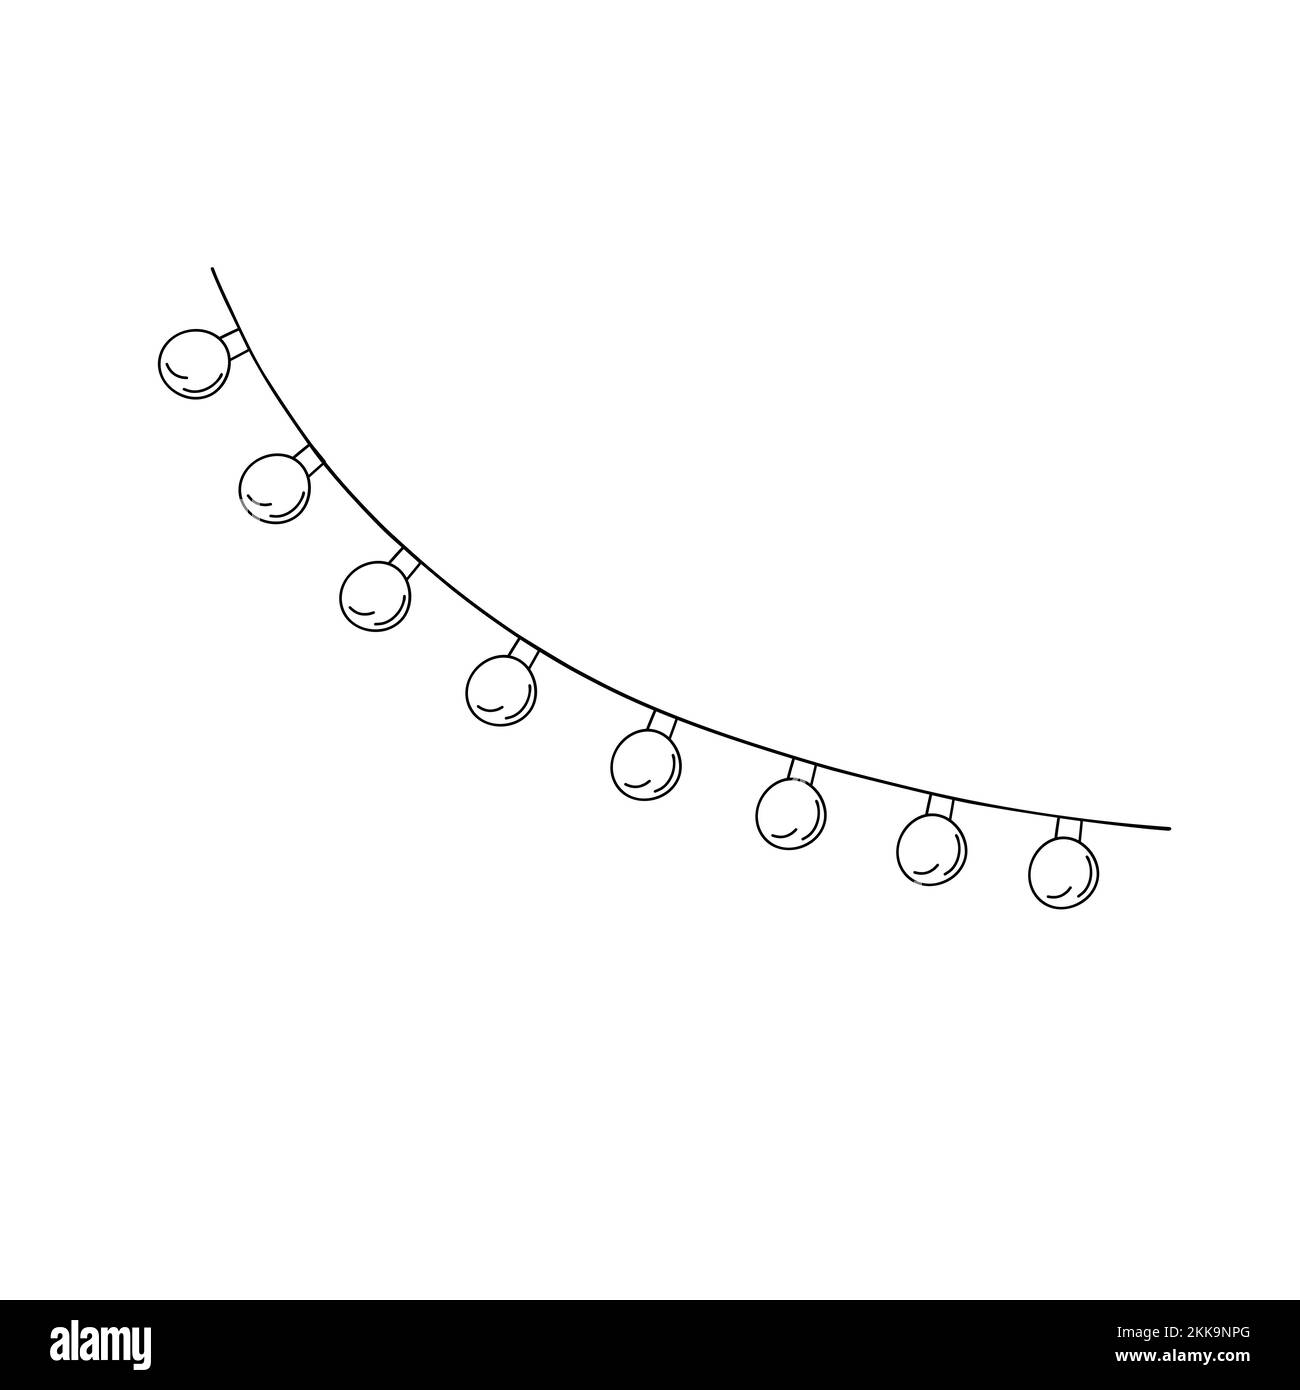 christmas lights clipart black and white